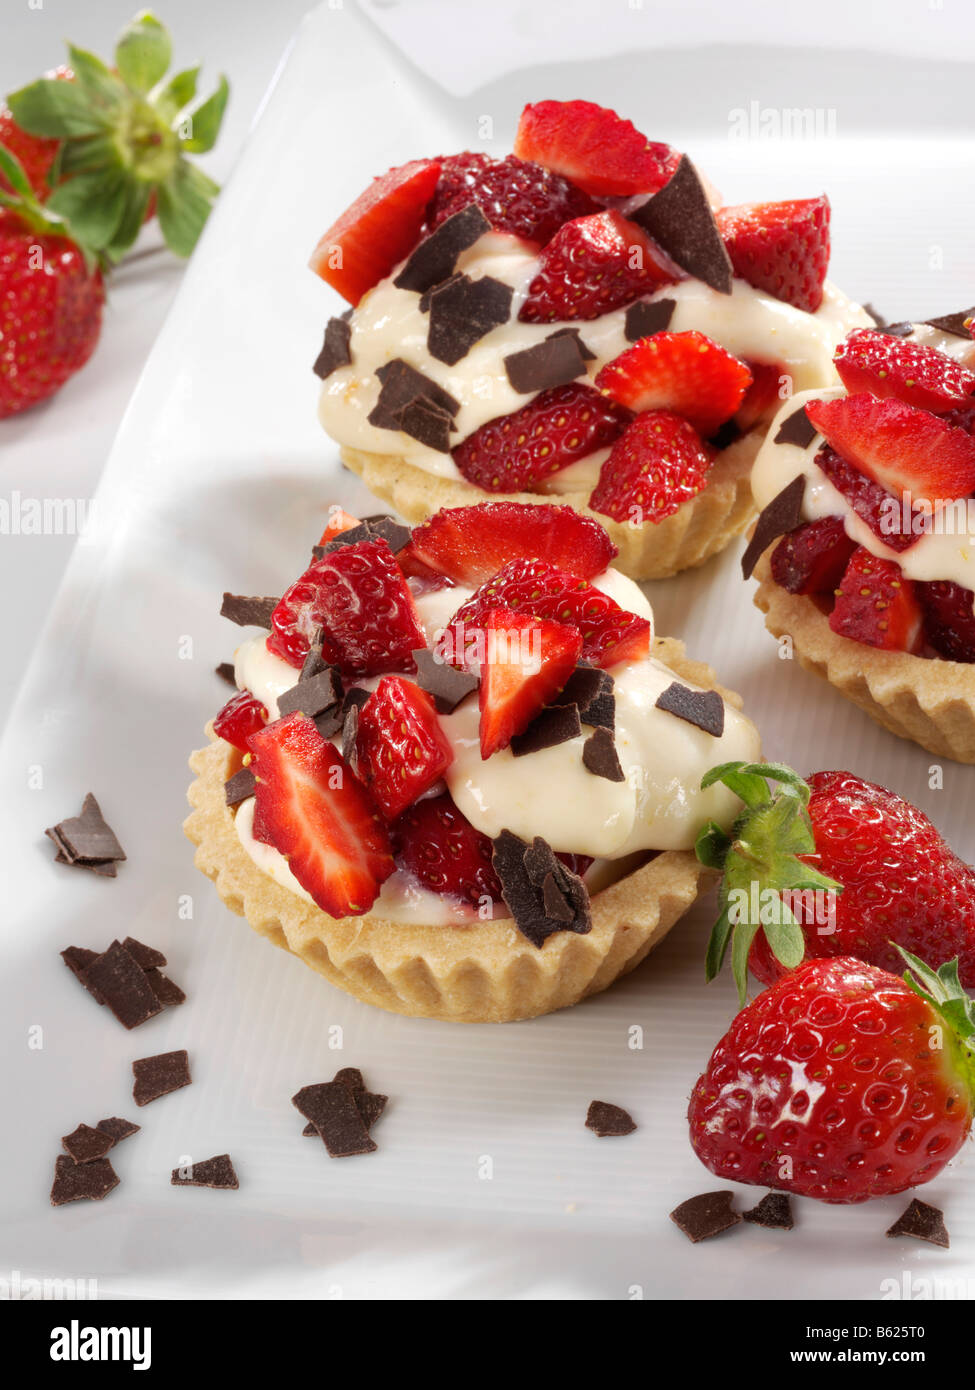 Strawberry tarts with fresh strawberries and chocolate crumbles Stock Photo